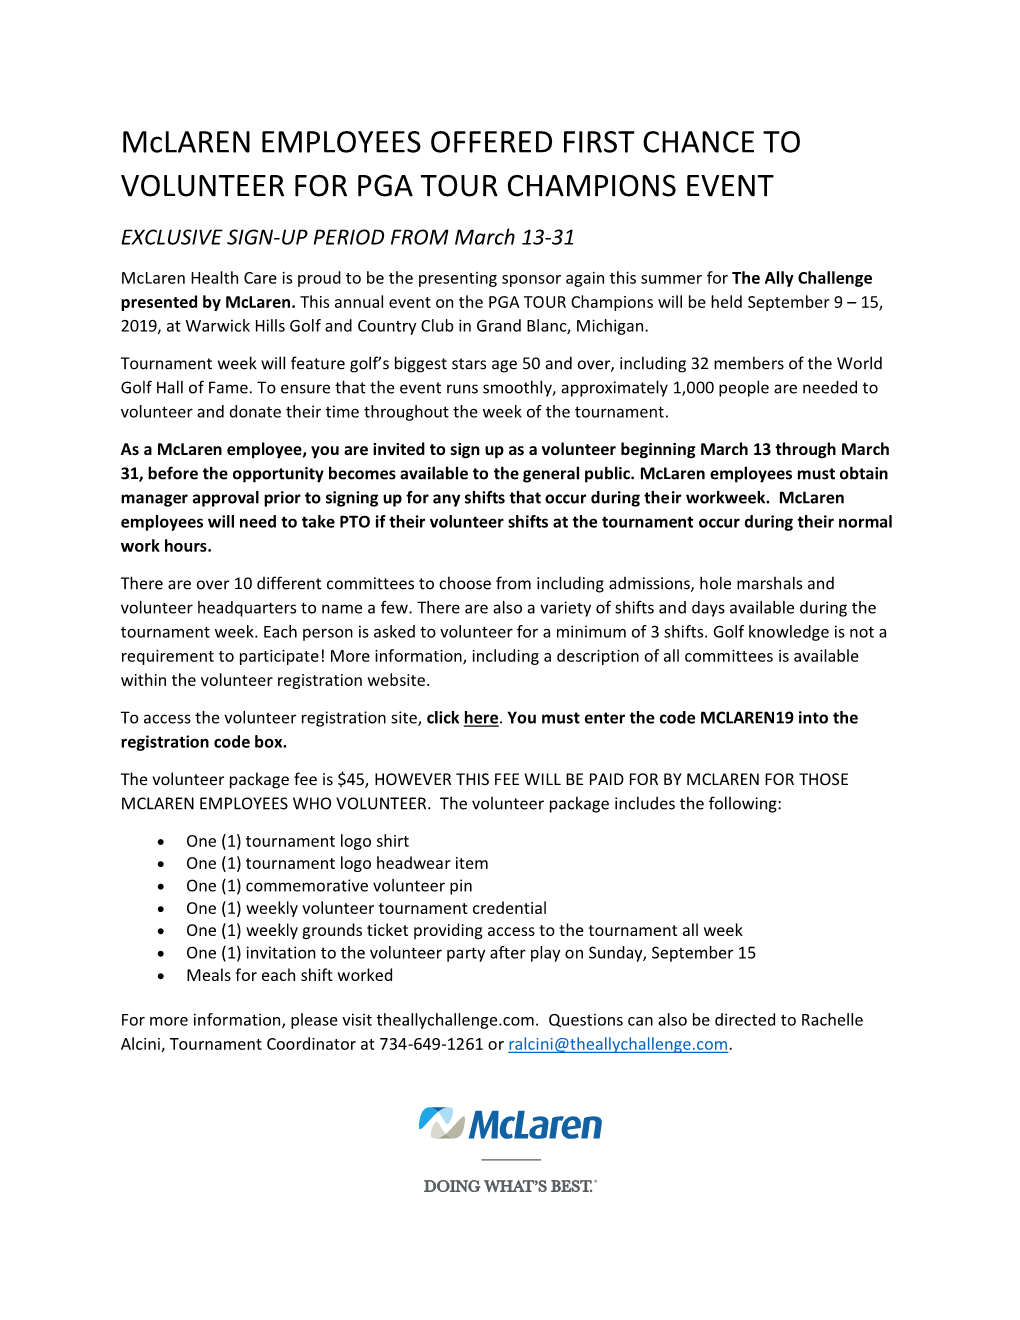 Mclaren EMPLOYEES OFFERED FIRST CHANCE to VOLUNTEER for PGA TOUR CHAMPIONS EVENT EXCLUSIVE SIGN-UP PERIOD from March 13-31